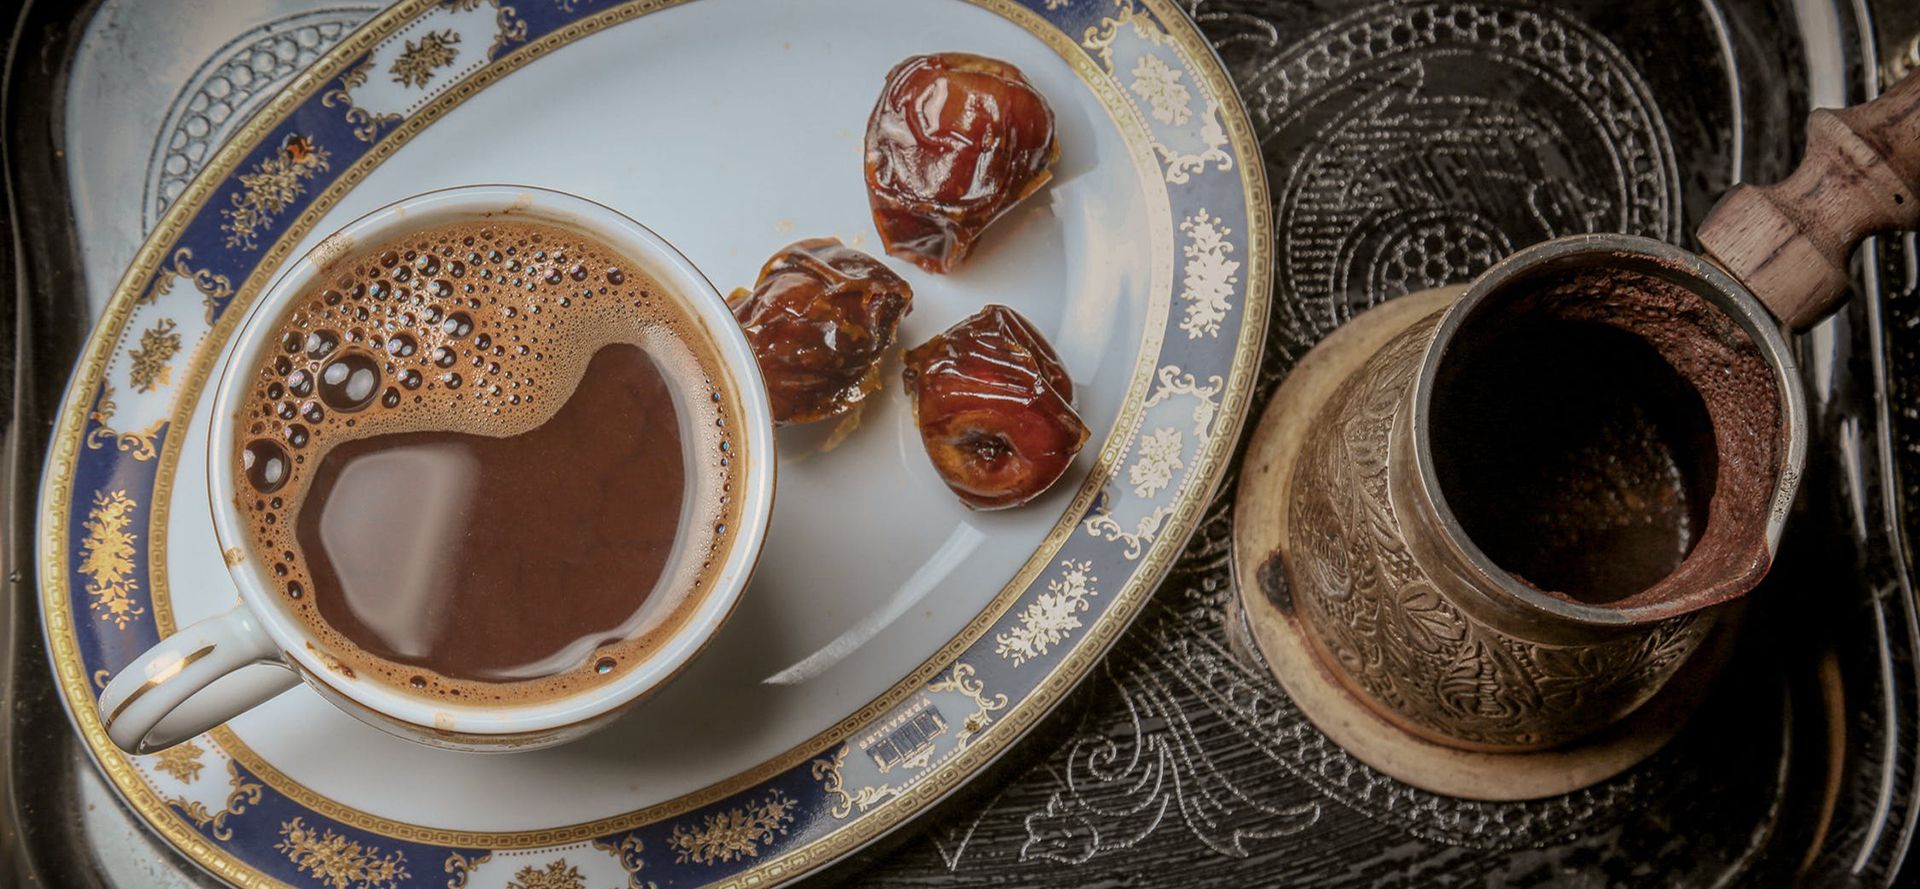 A Cup Of Turkish Coffee And Cezve.